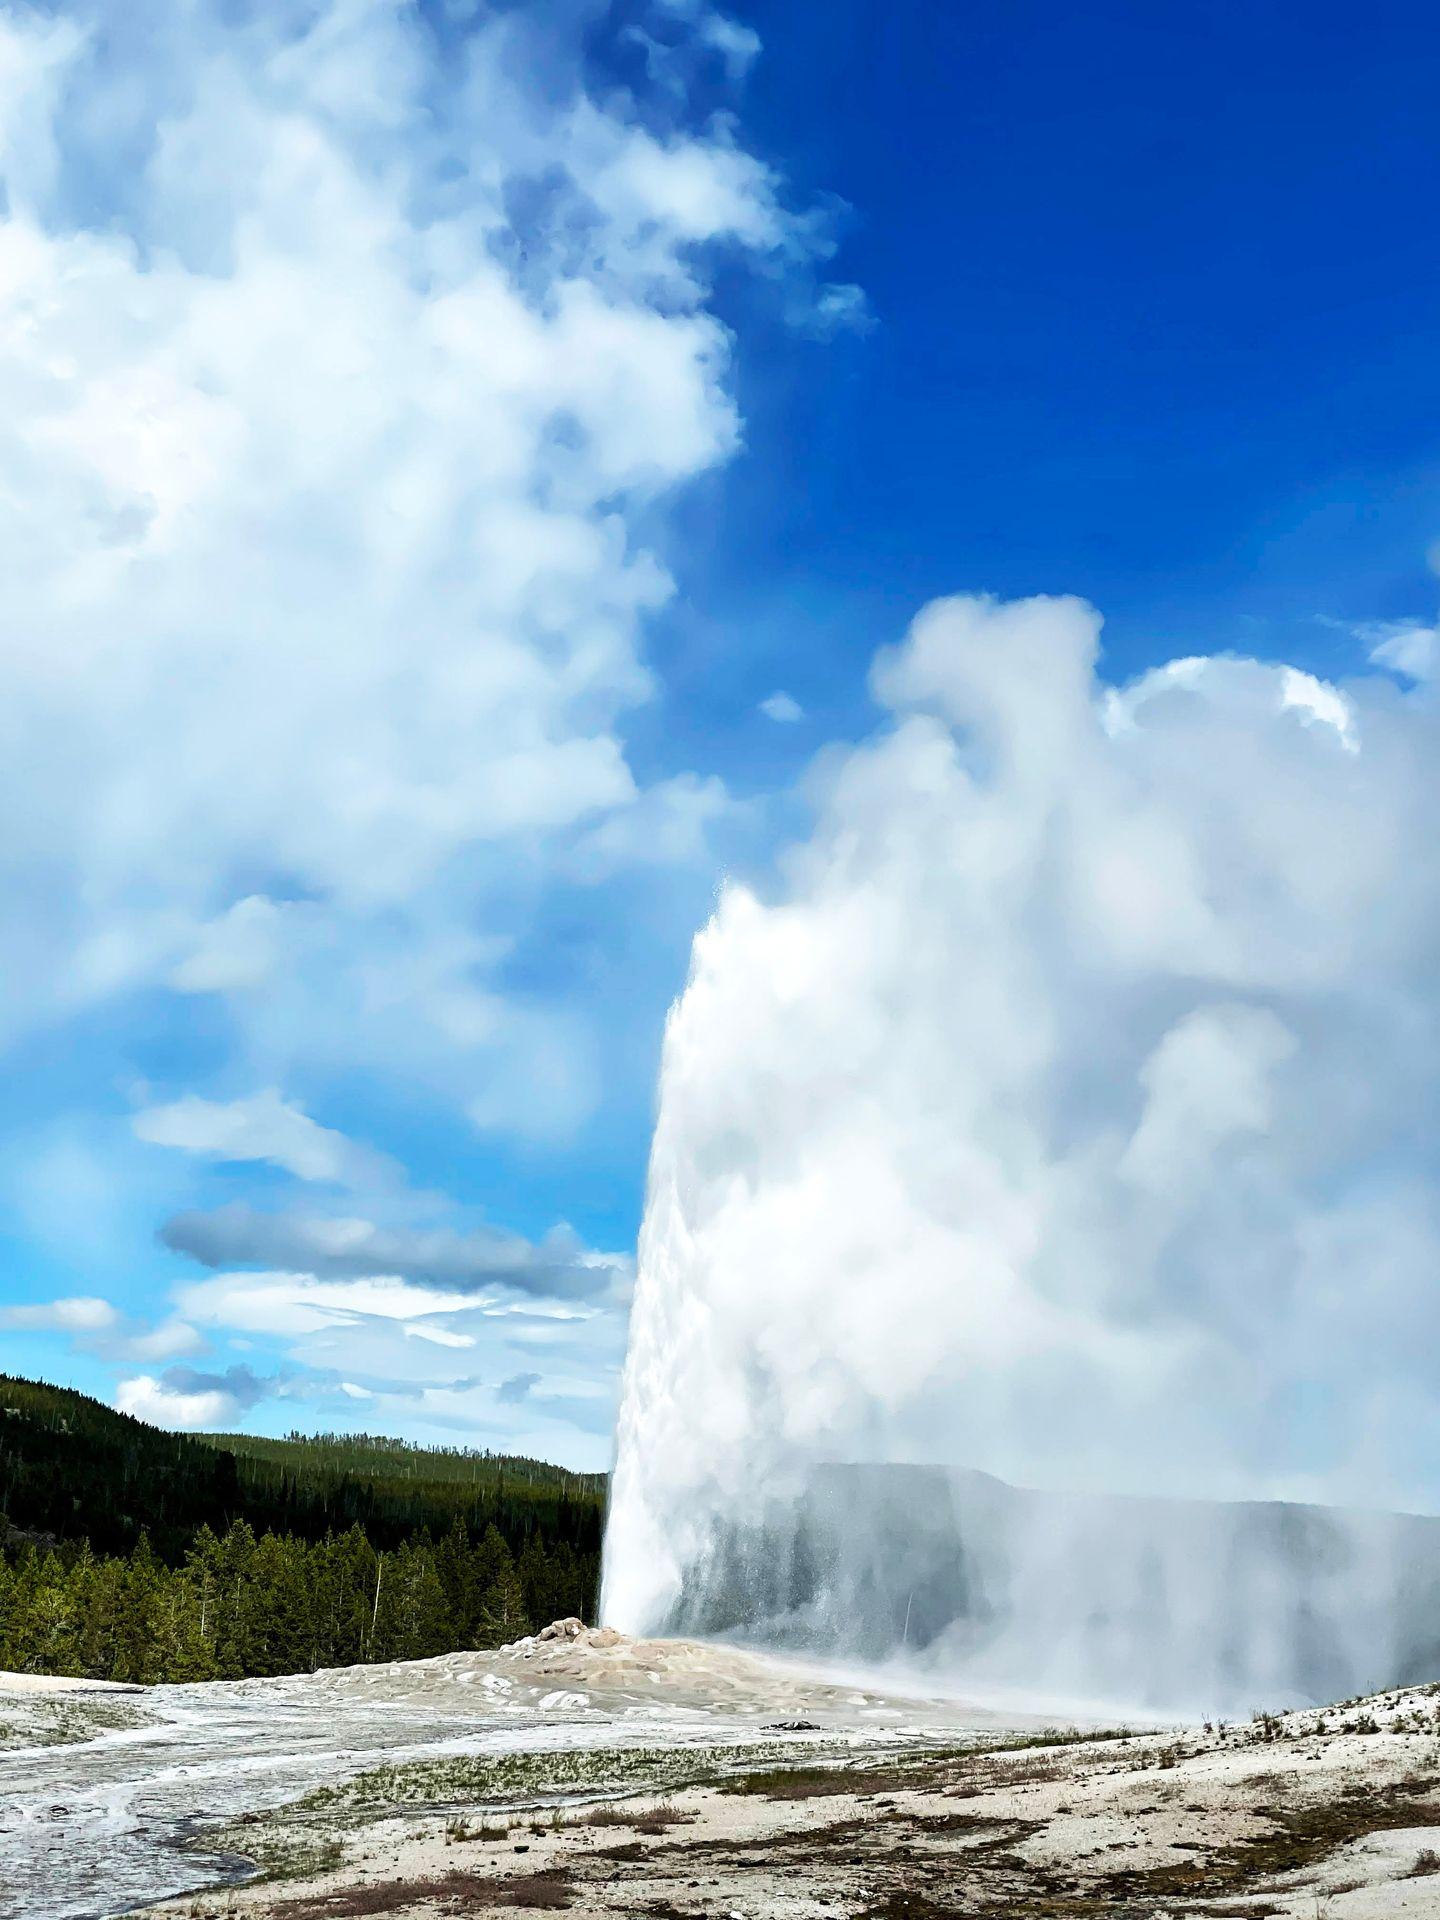 A view of the Old Faithful geyser erupting.